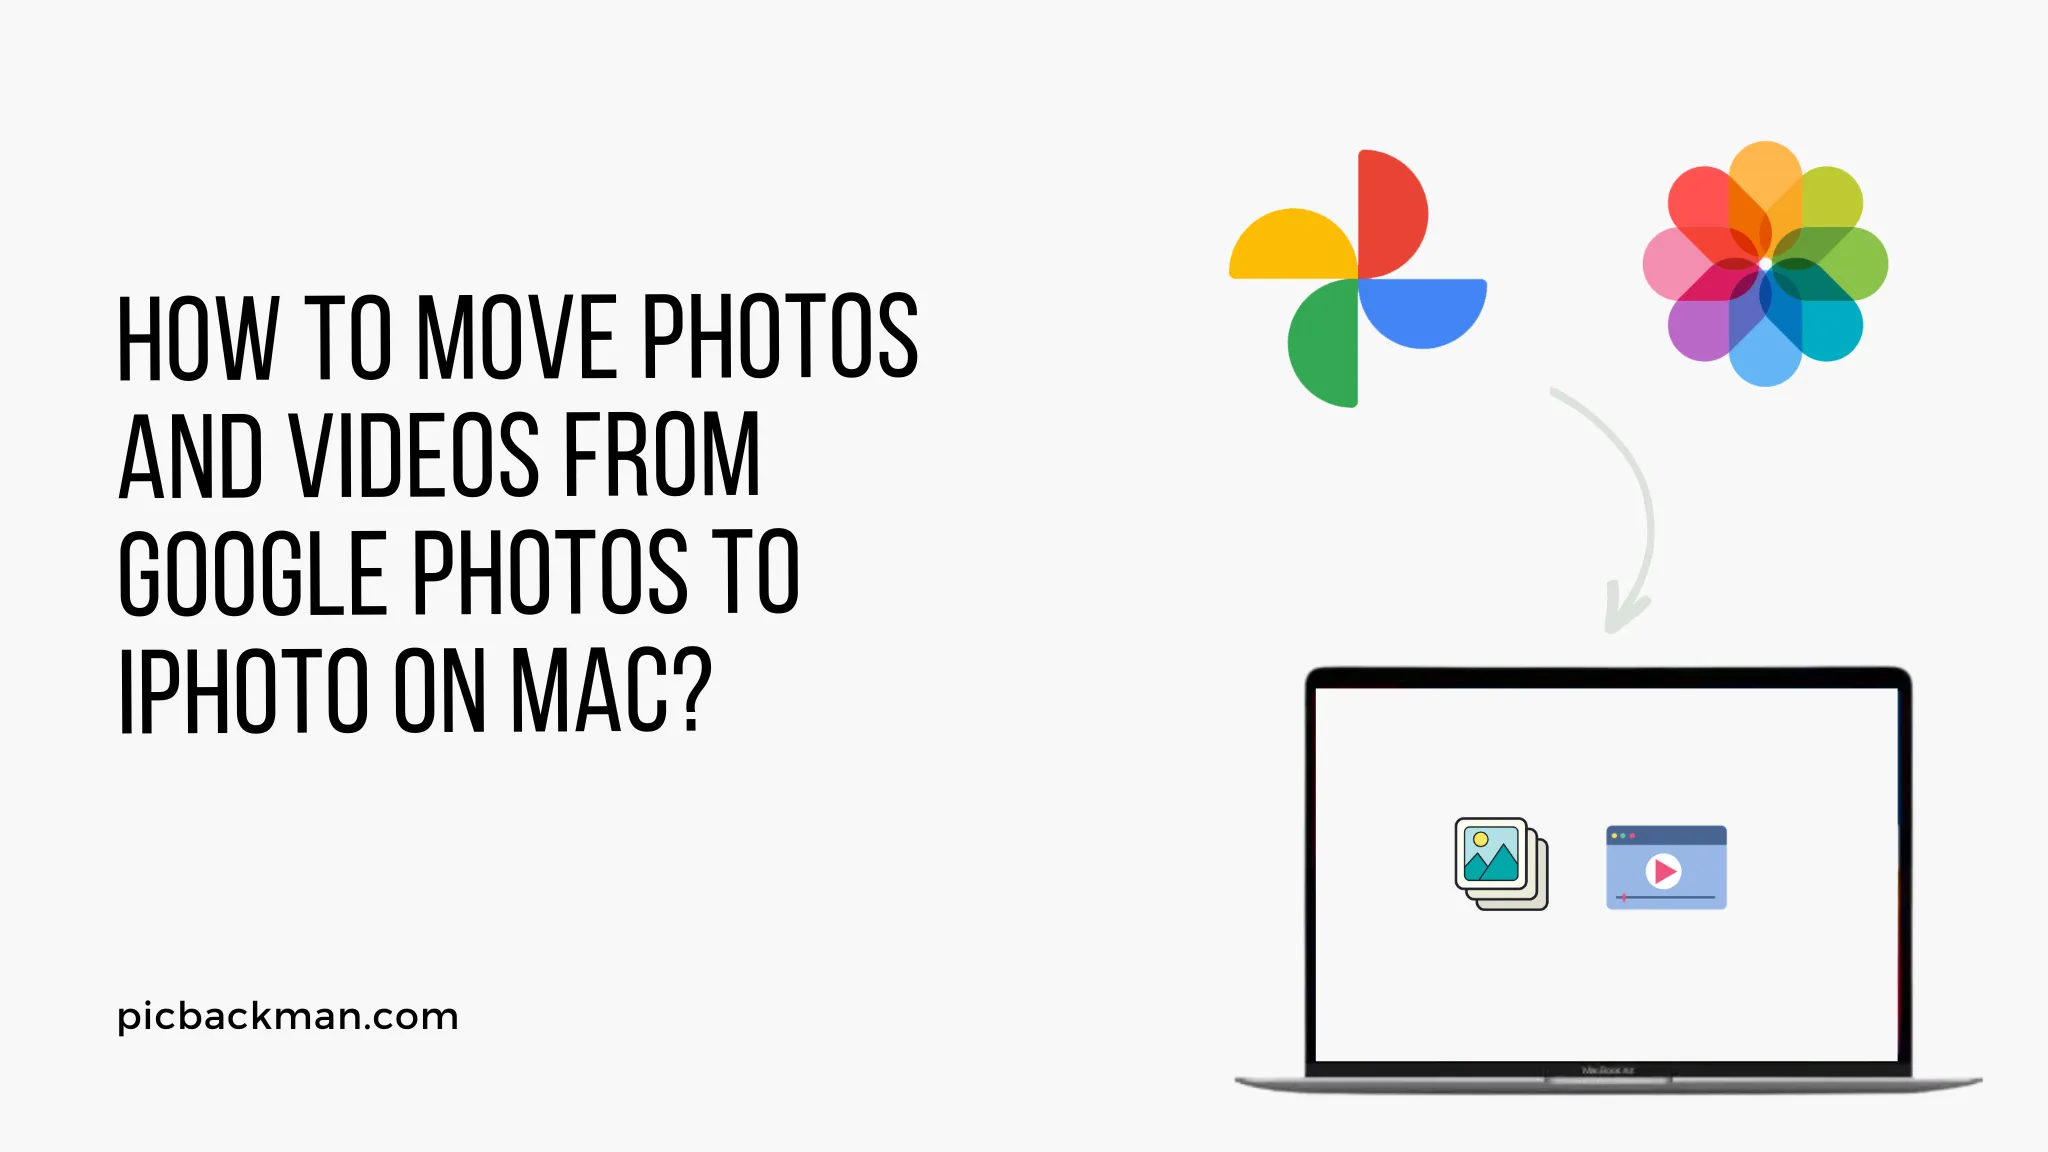 How to Move Photos and Videos from Google Photos to iPhoto on Mac?